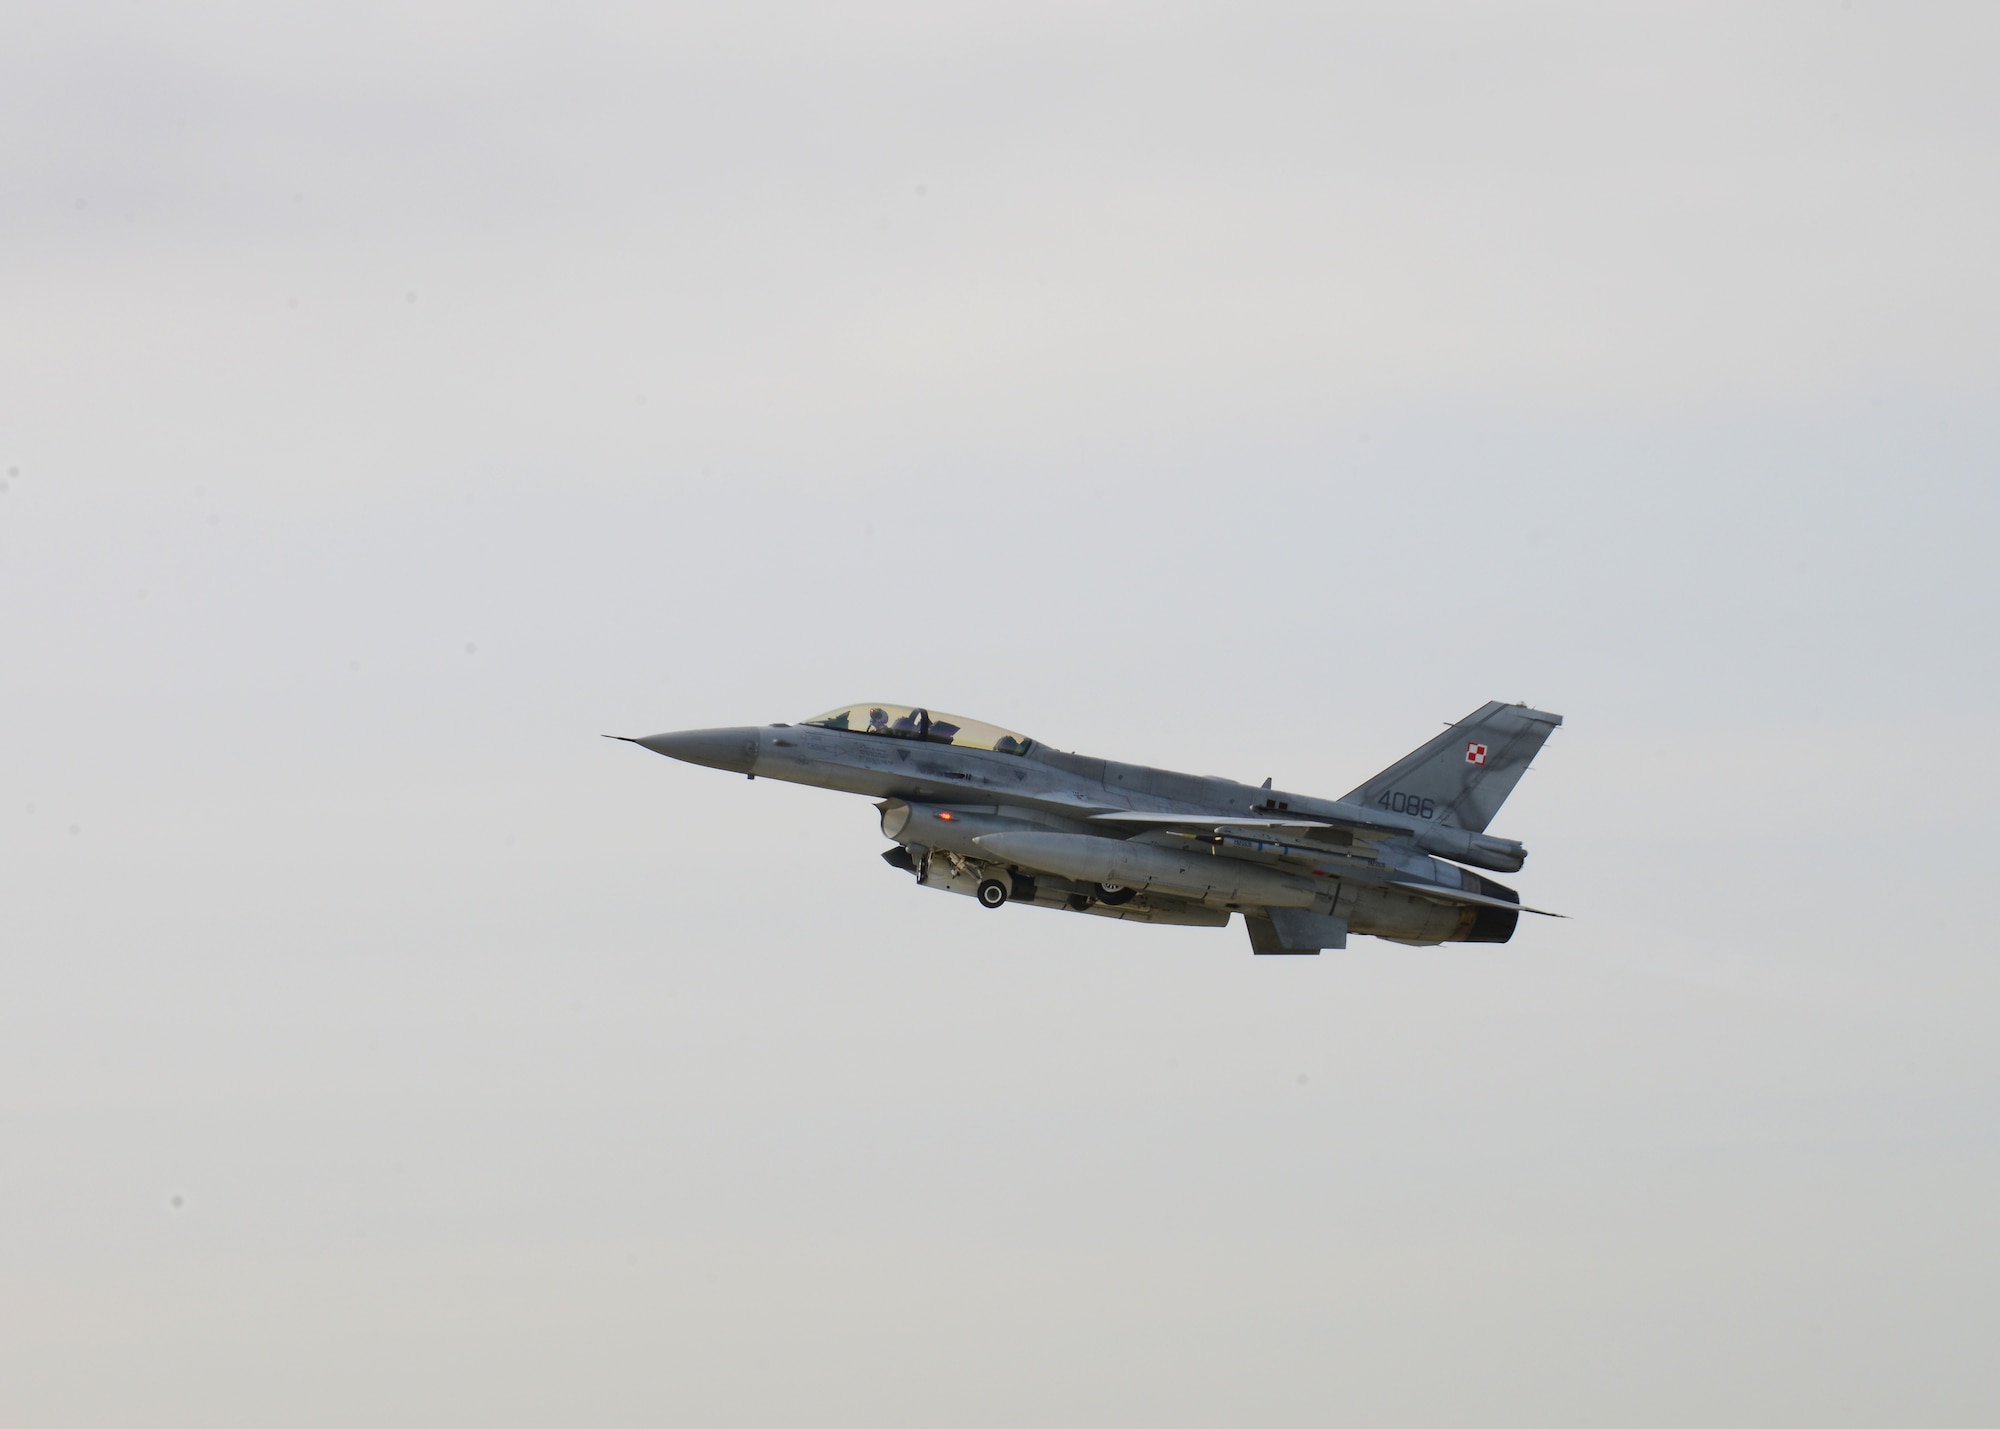 A Polish F-16 Fighting Falcon fighter aircraft takes off for a training mission with U.S. Air Force F-16s, April 1, 2014, at Łask Air Base, Poland. Poland continues to build its relationship with the U.S. as both nations' air forces integrate their capabilities through training sorties in a joint theater capacity for the first time since the arrival of 31st Fighter Wing aircraft and personnel from Aviano Air Base, Italy. (U.S. Air Force photo/Airman 1st Class Ryan Conroy/Released)